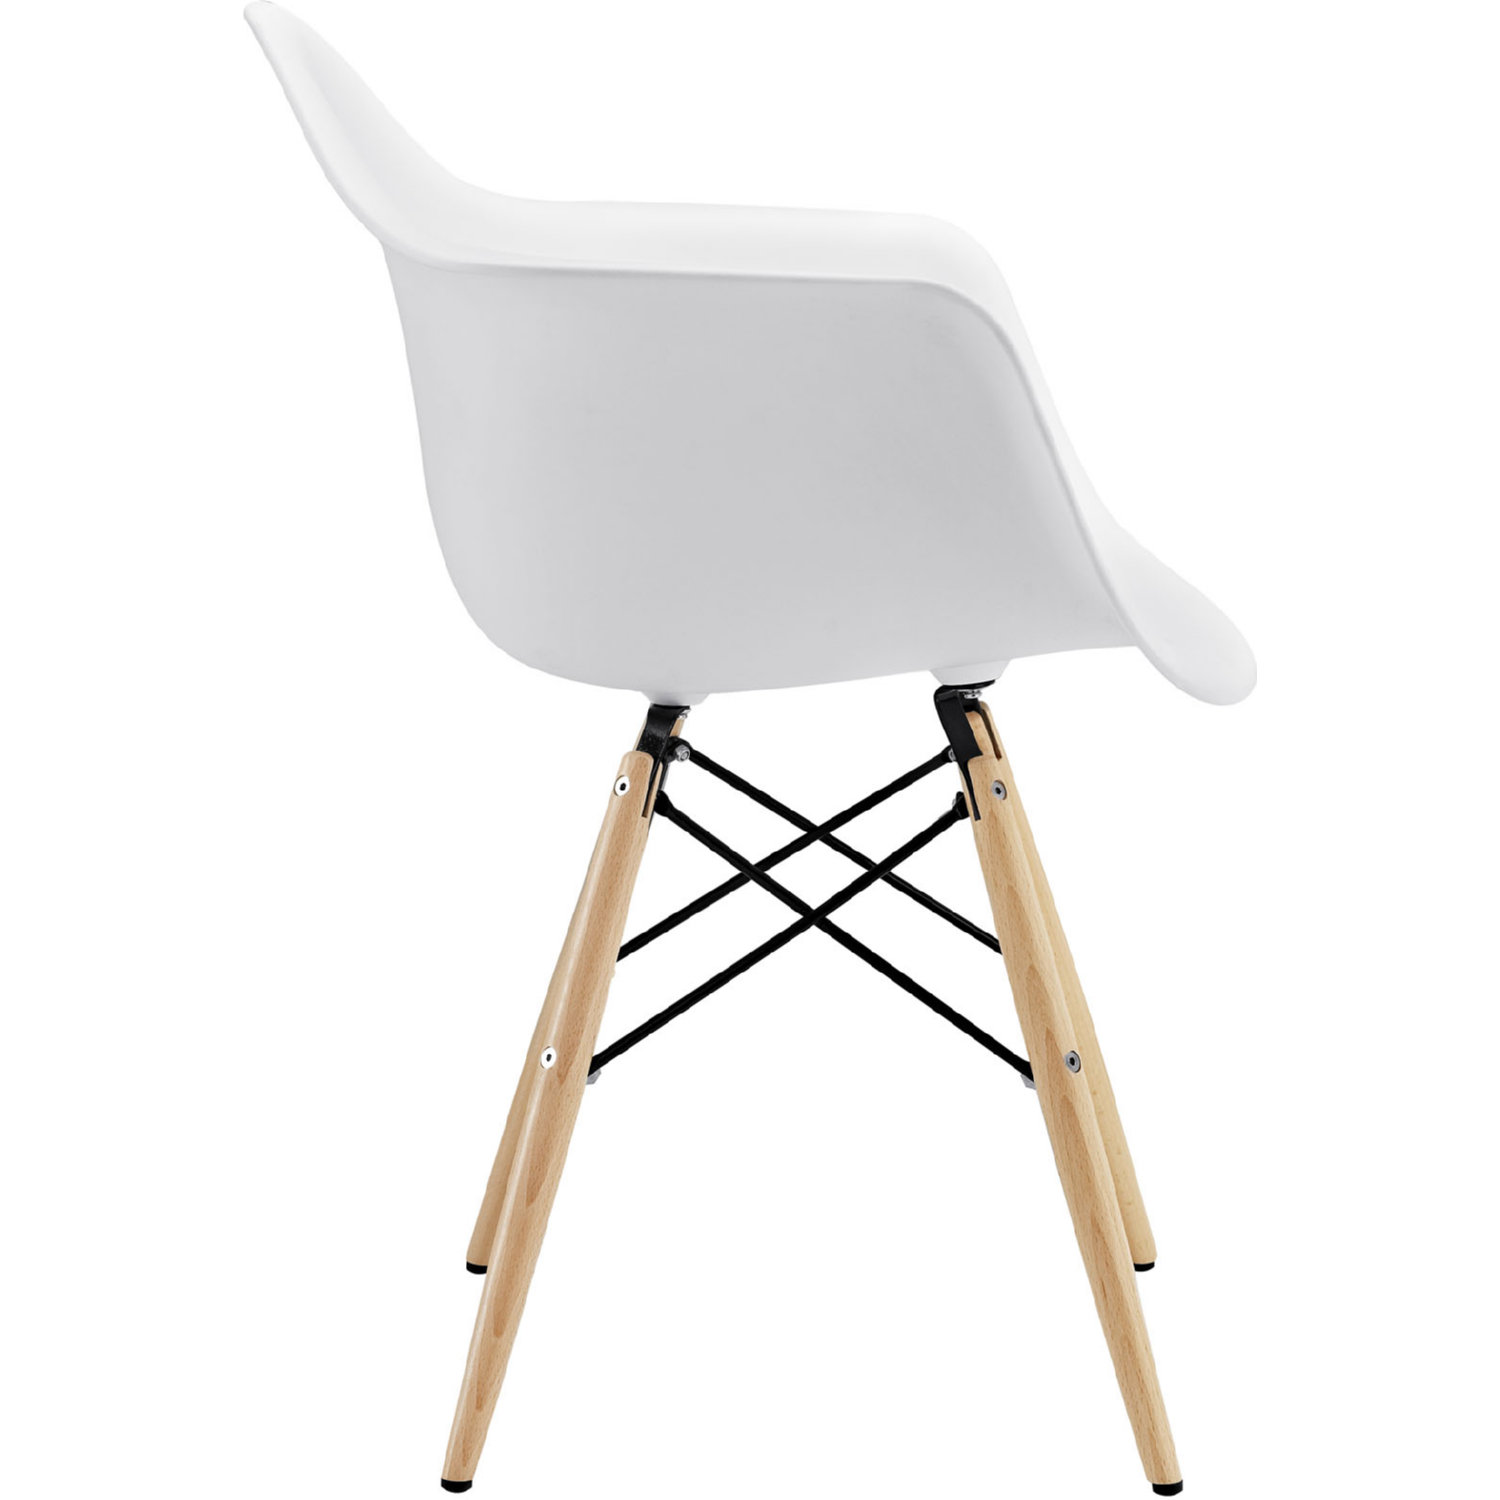 EEI-182-WHI Modway Pyramid Dining Armchair with Natural Wood Legs in White Modway Inc